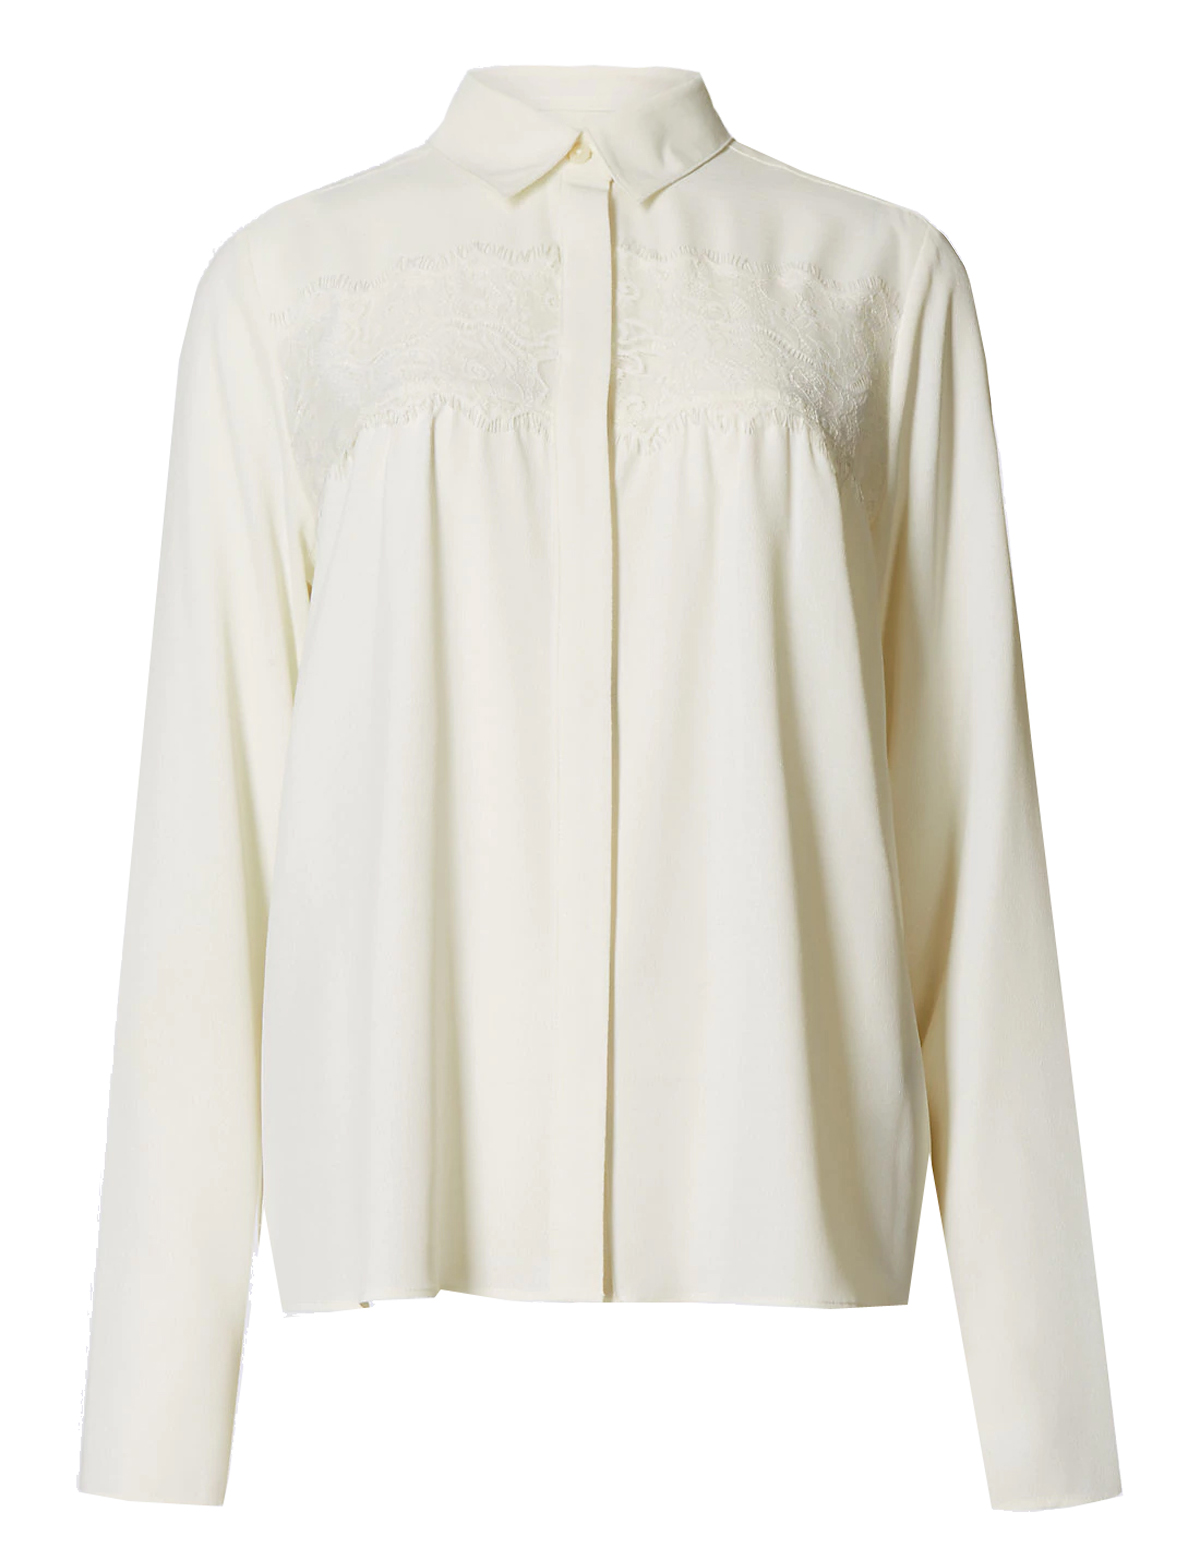 Marks and Spencer - - M&5 IVORY Long Sleeve Lace Panel Shirt - Size 8 to 24